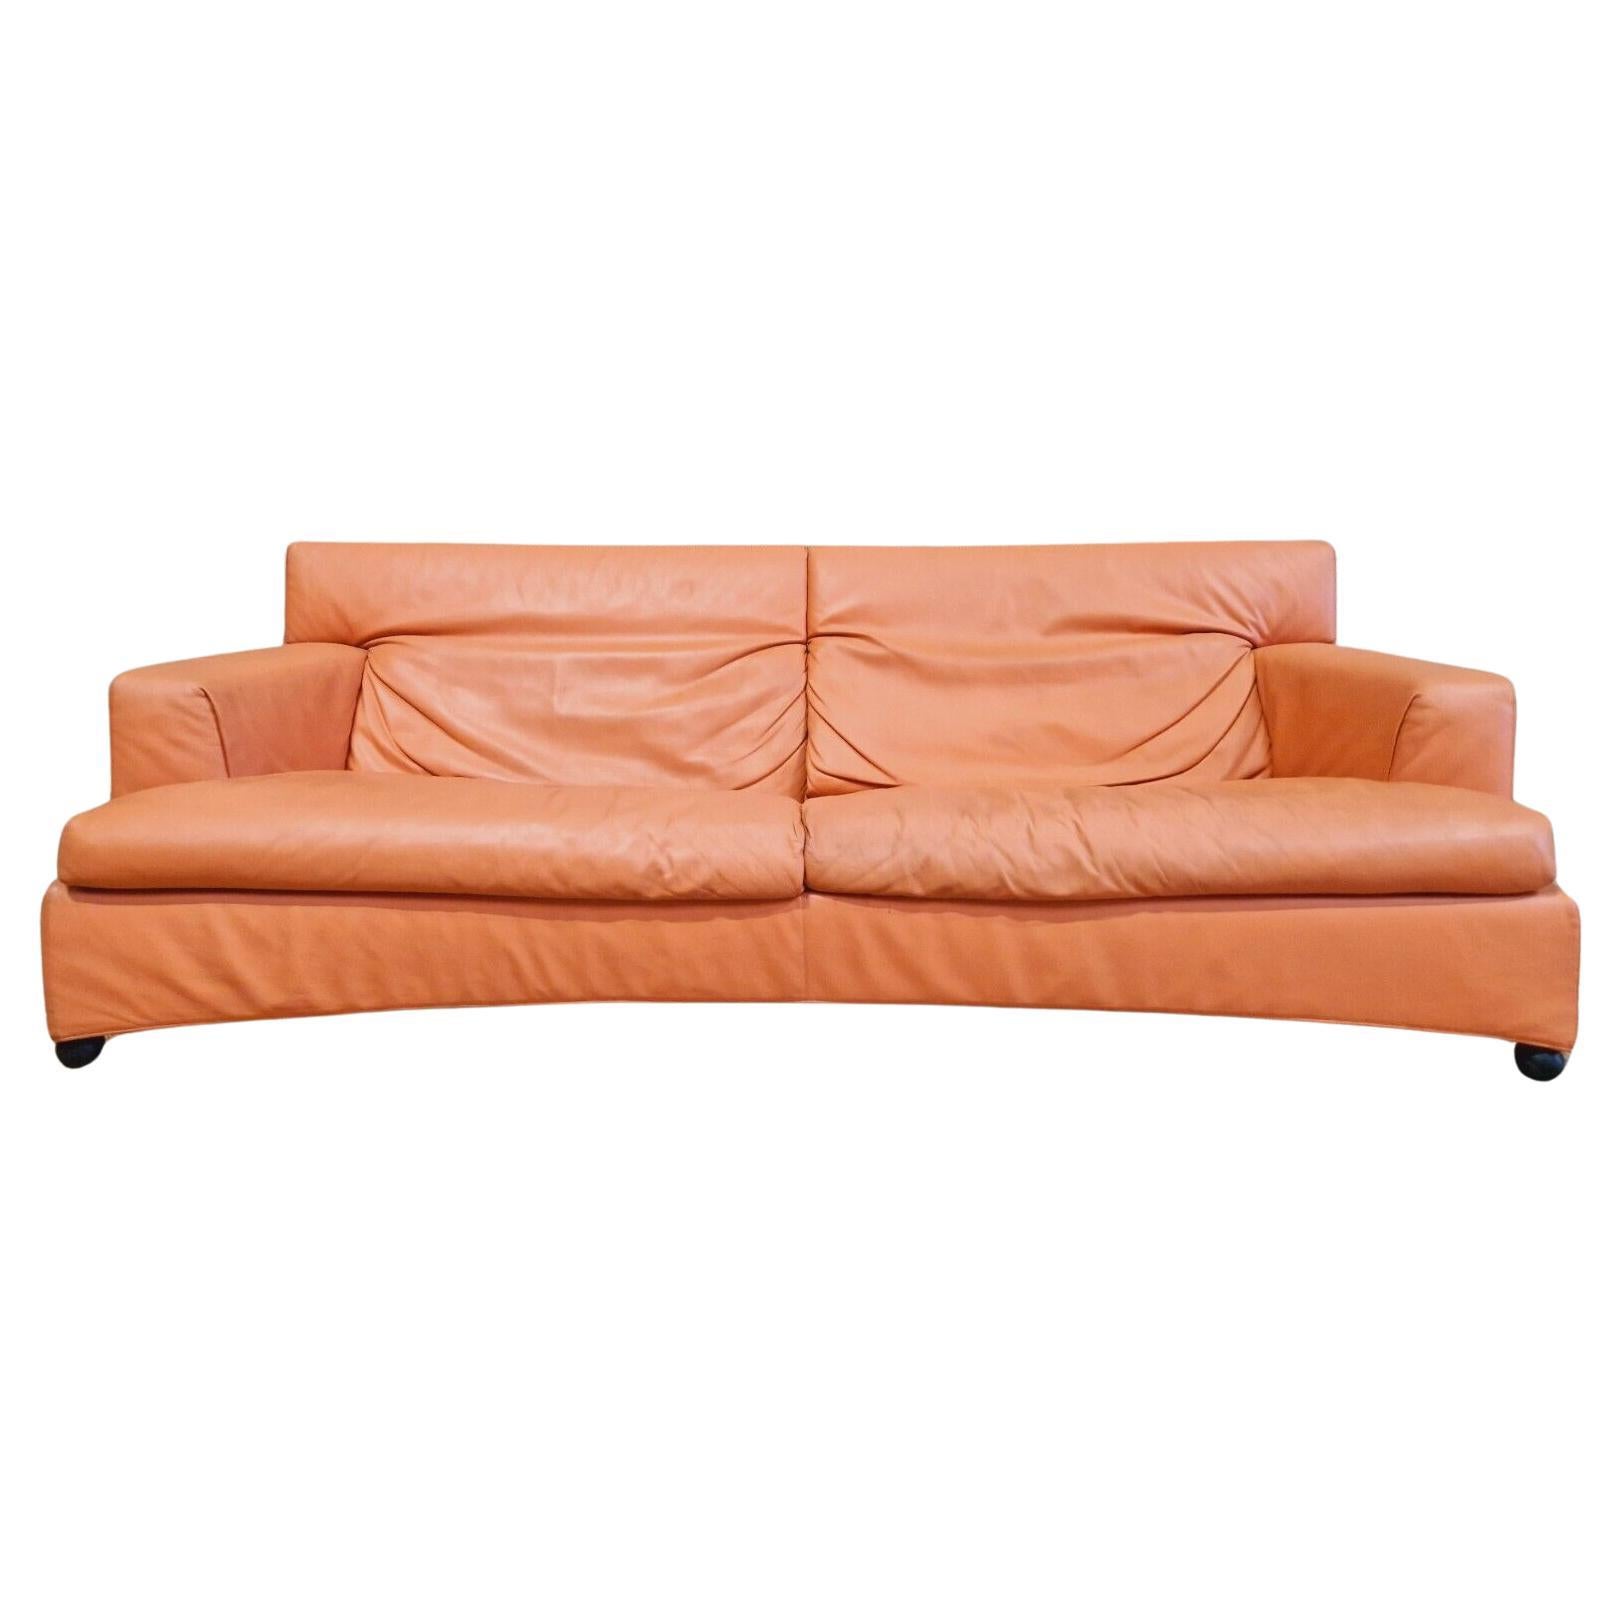 1980s Paolo Piva Sofa Italian Pink Leather For Sale